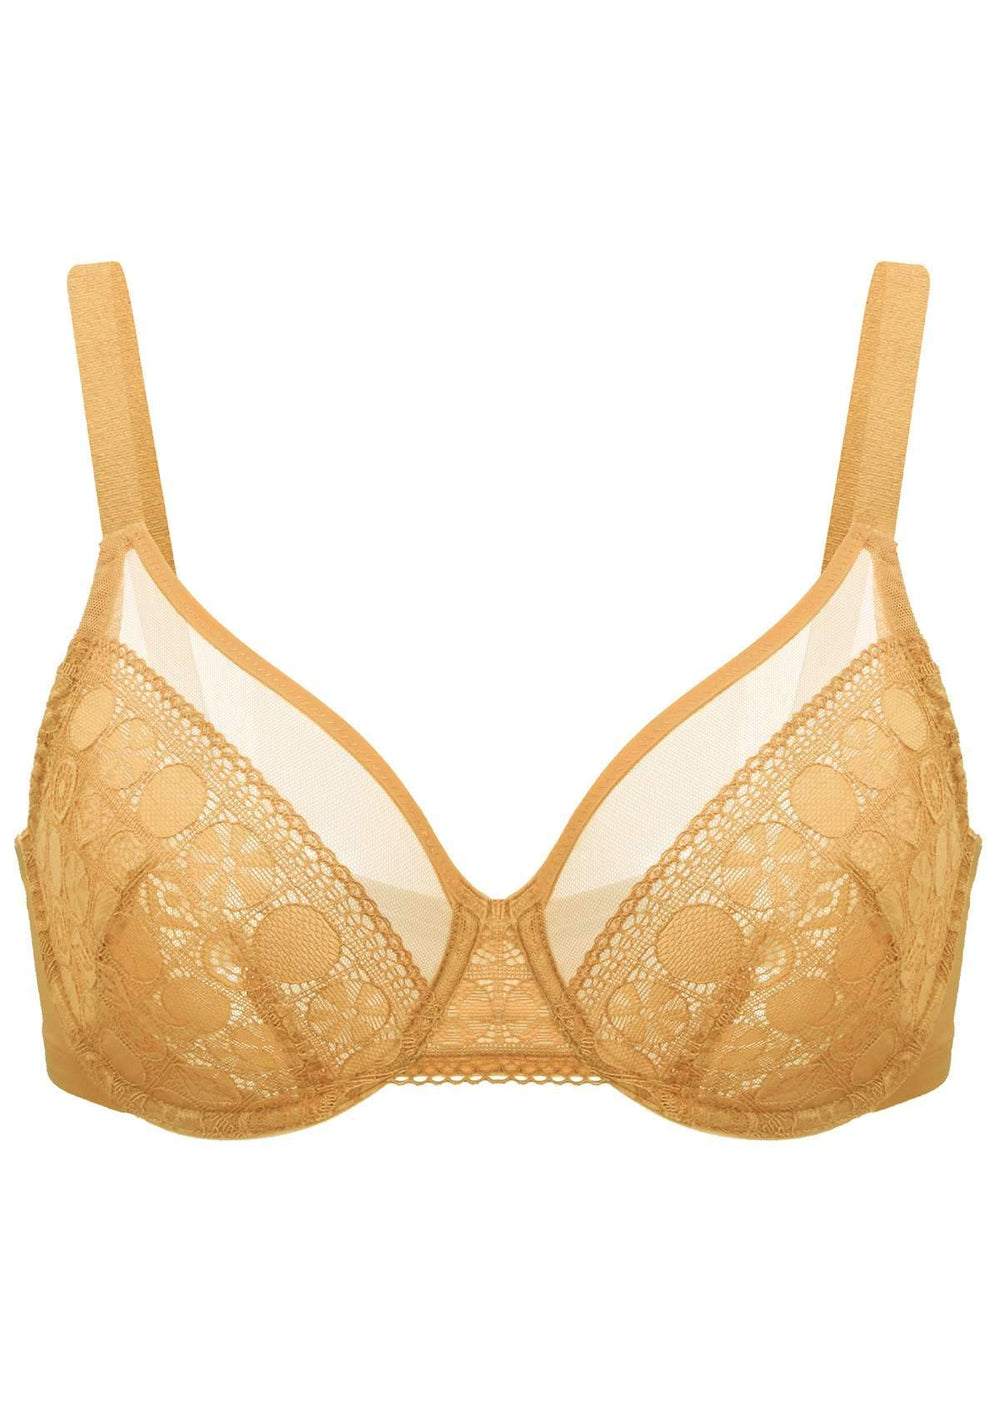 HSIA Time to Shine Lace Unlined Bra